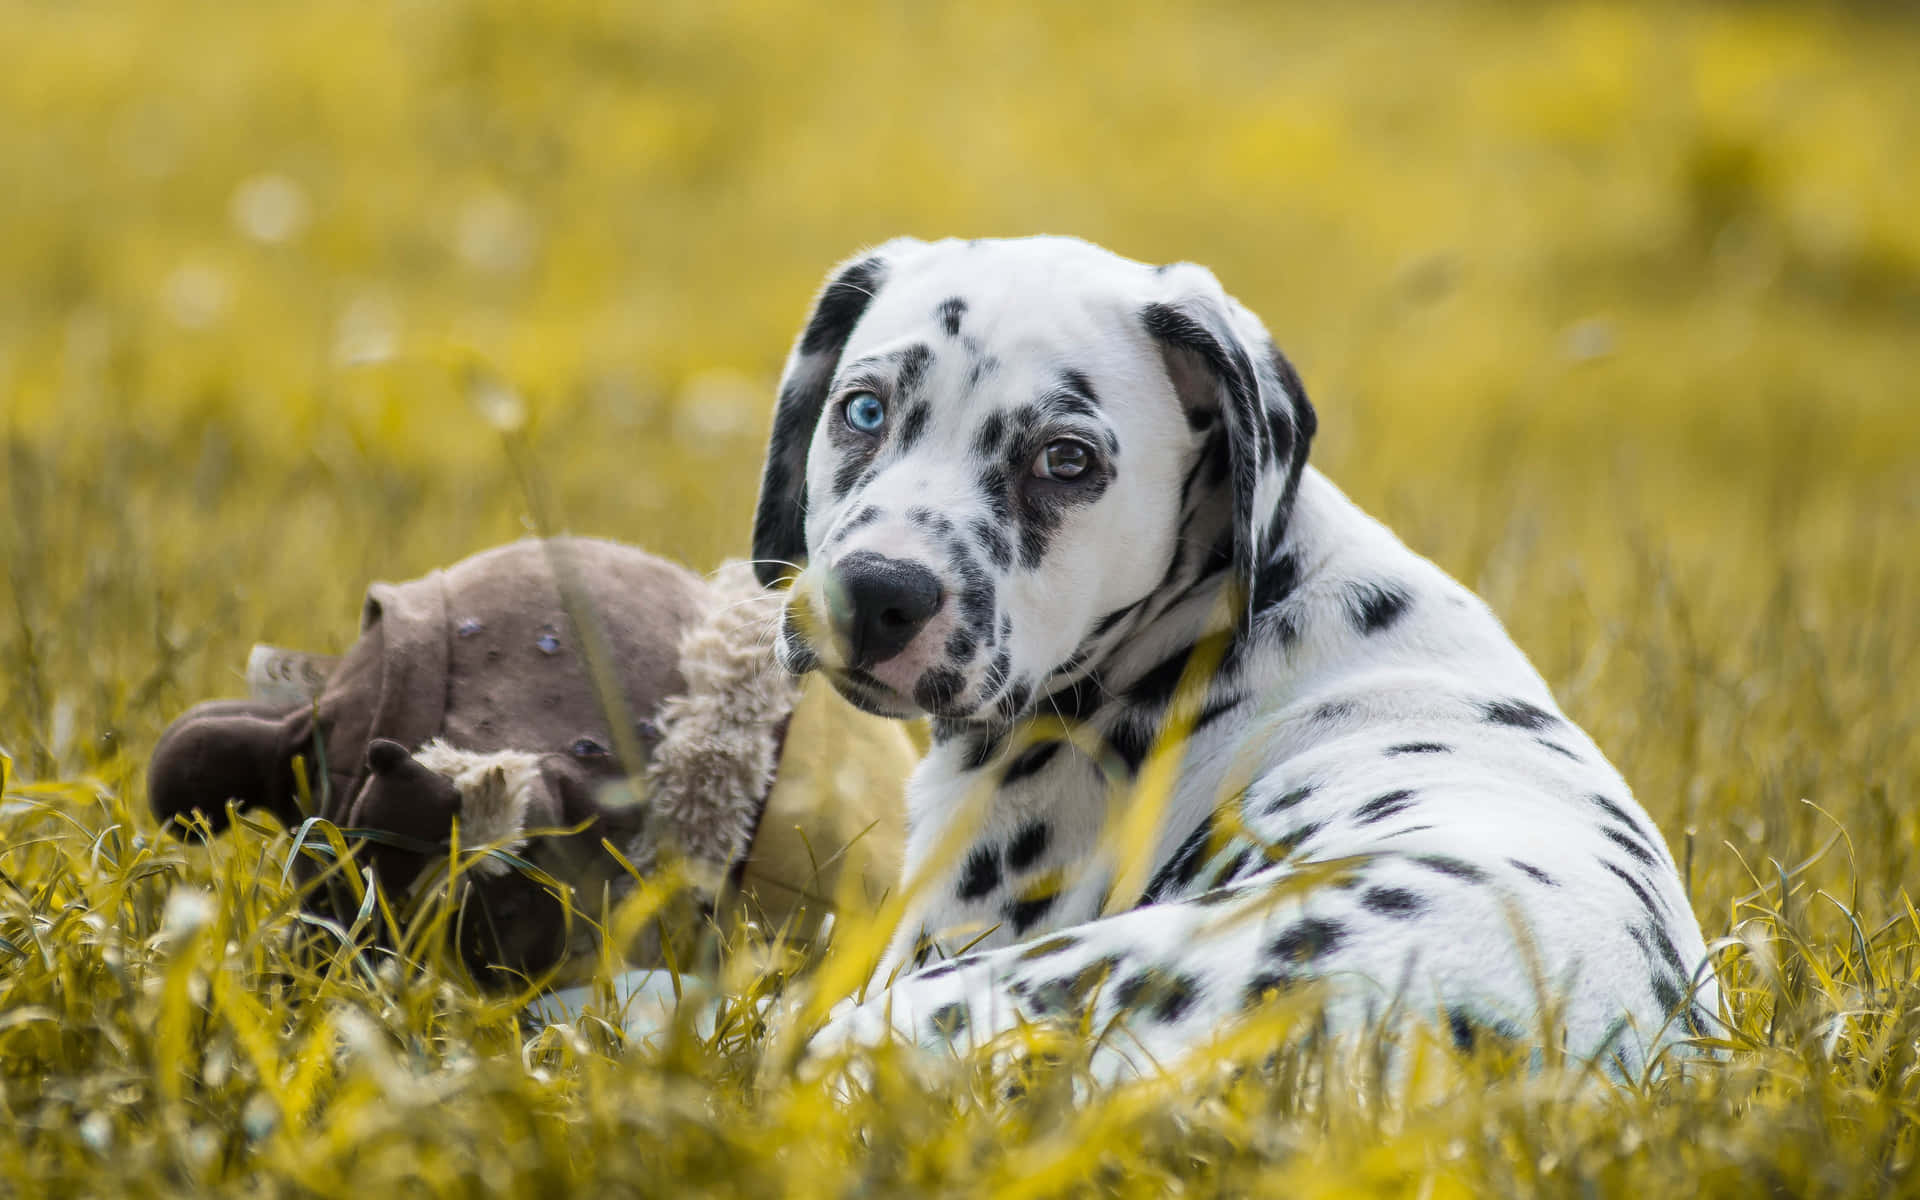 Two happy Dalmatian puppies playing